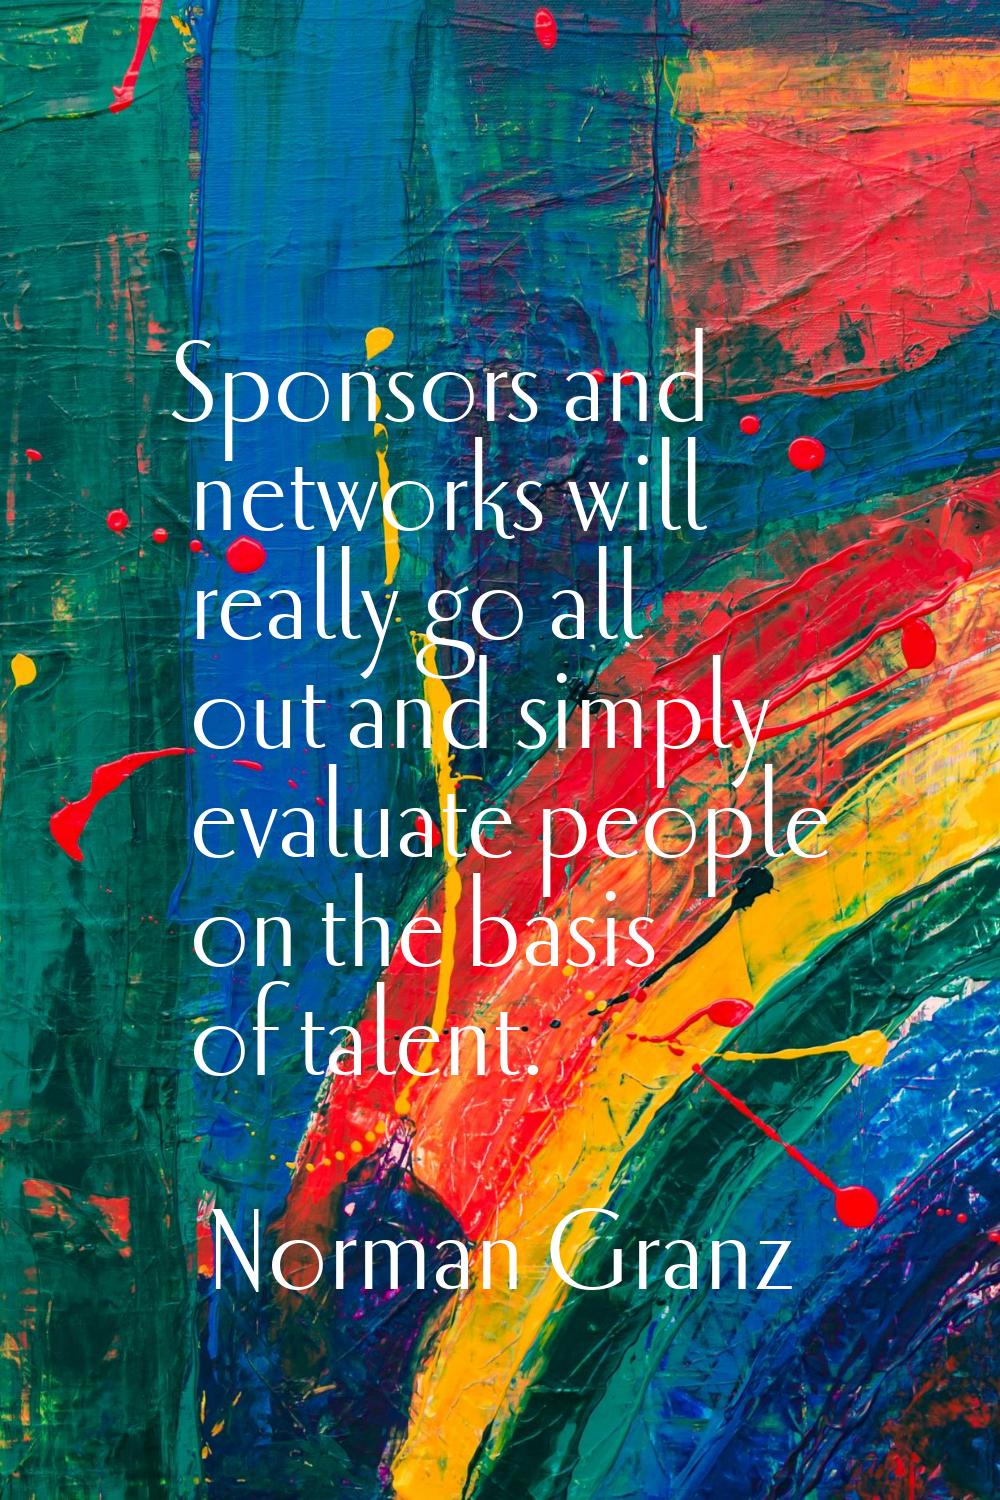 Sponsors and networks will really go all out and simply evaluate people on the basis of talent.